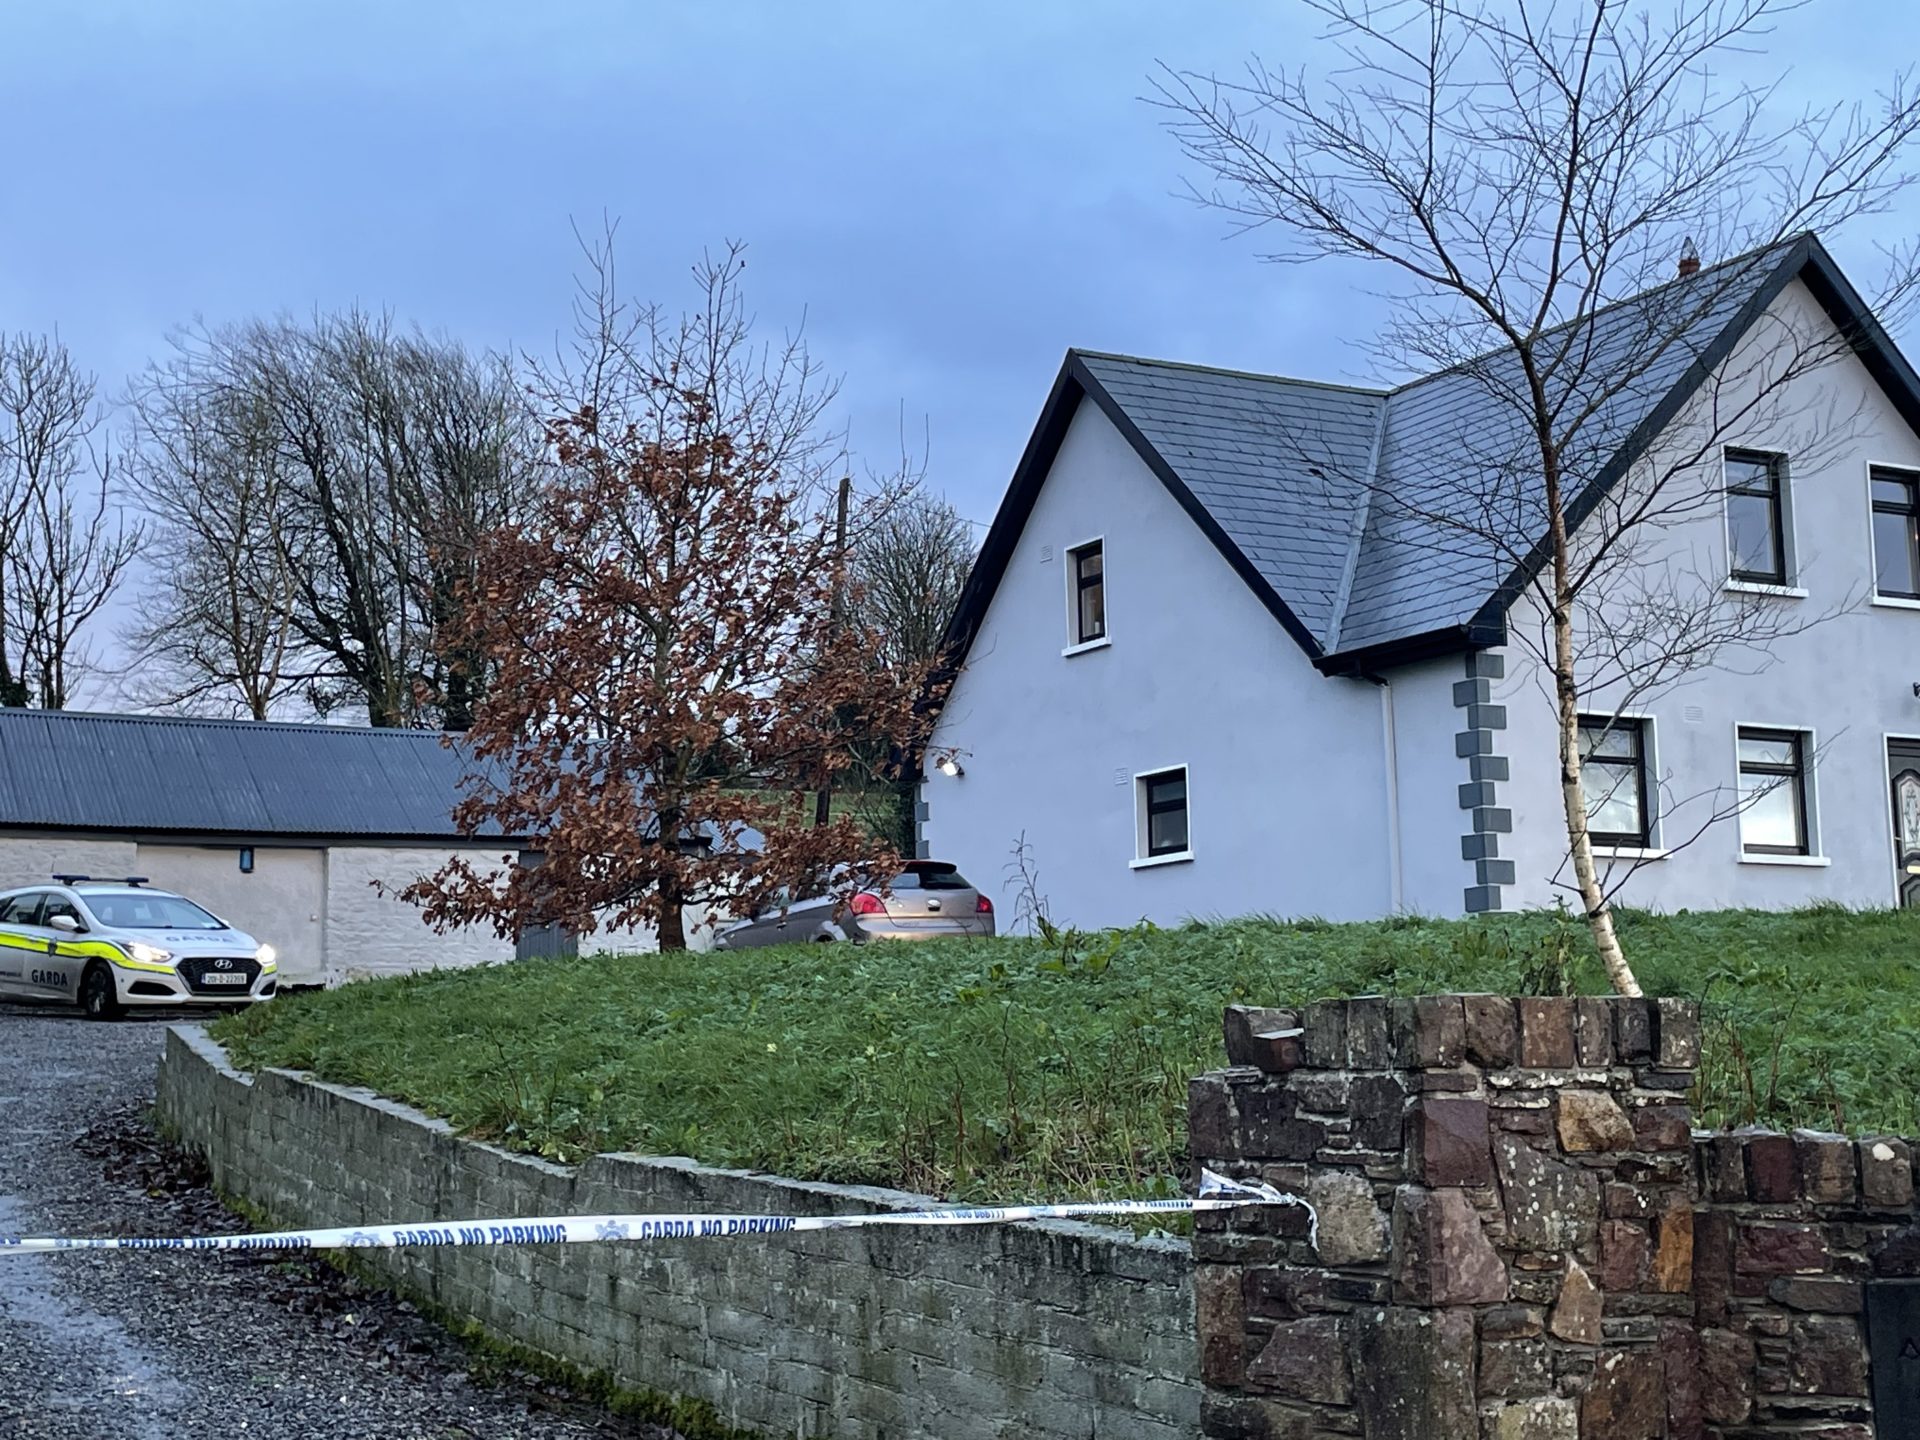 The house where a man’s body was discovered in Kilcross, Tipperary